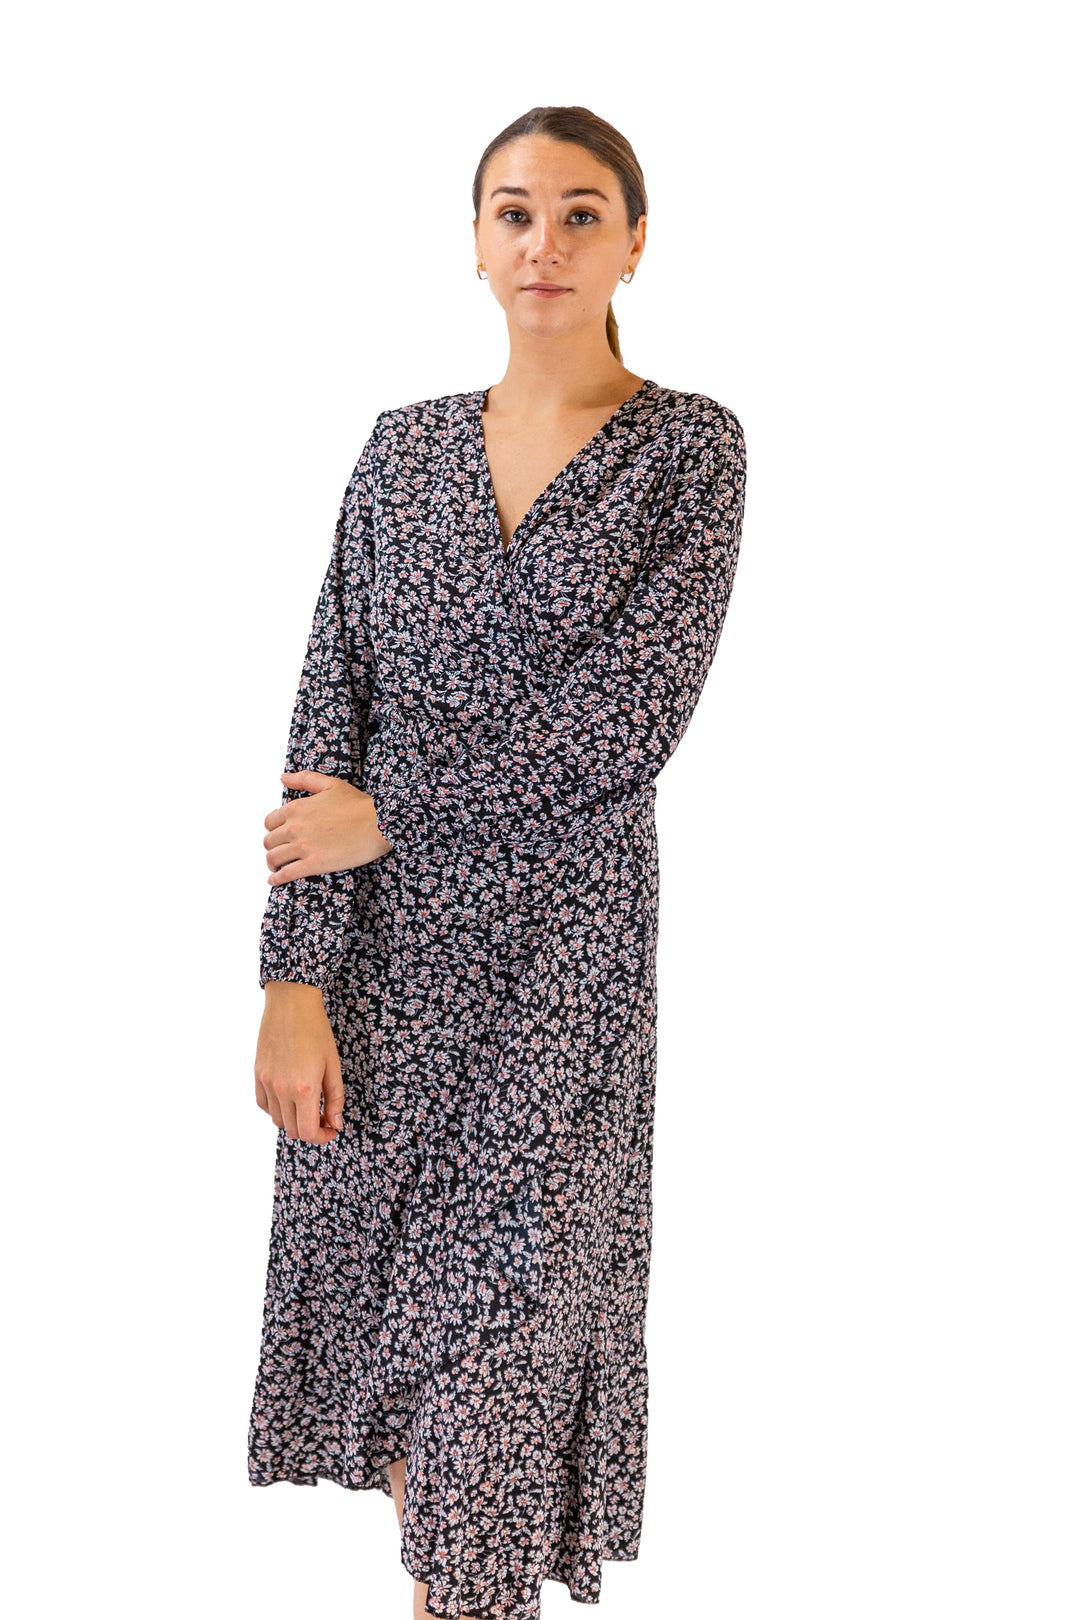 Elegant Lavish Lavender Long-Sleeved Midi Dress by Fabonics, featuring a Ruffle-Wrap Design in a Beautiful Purple Shade, ideal for Versatile Styling